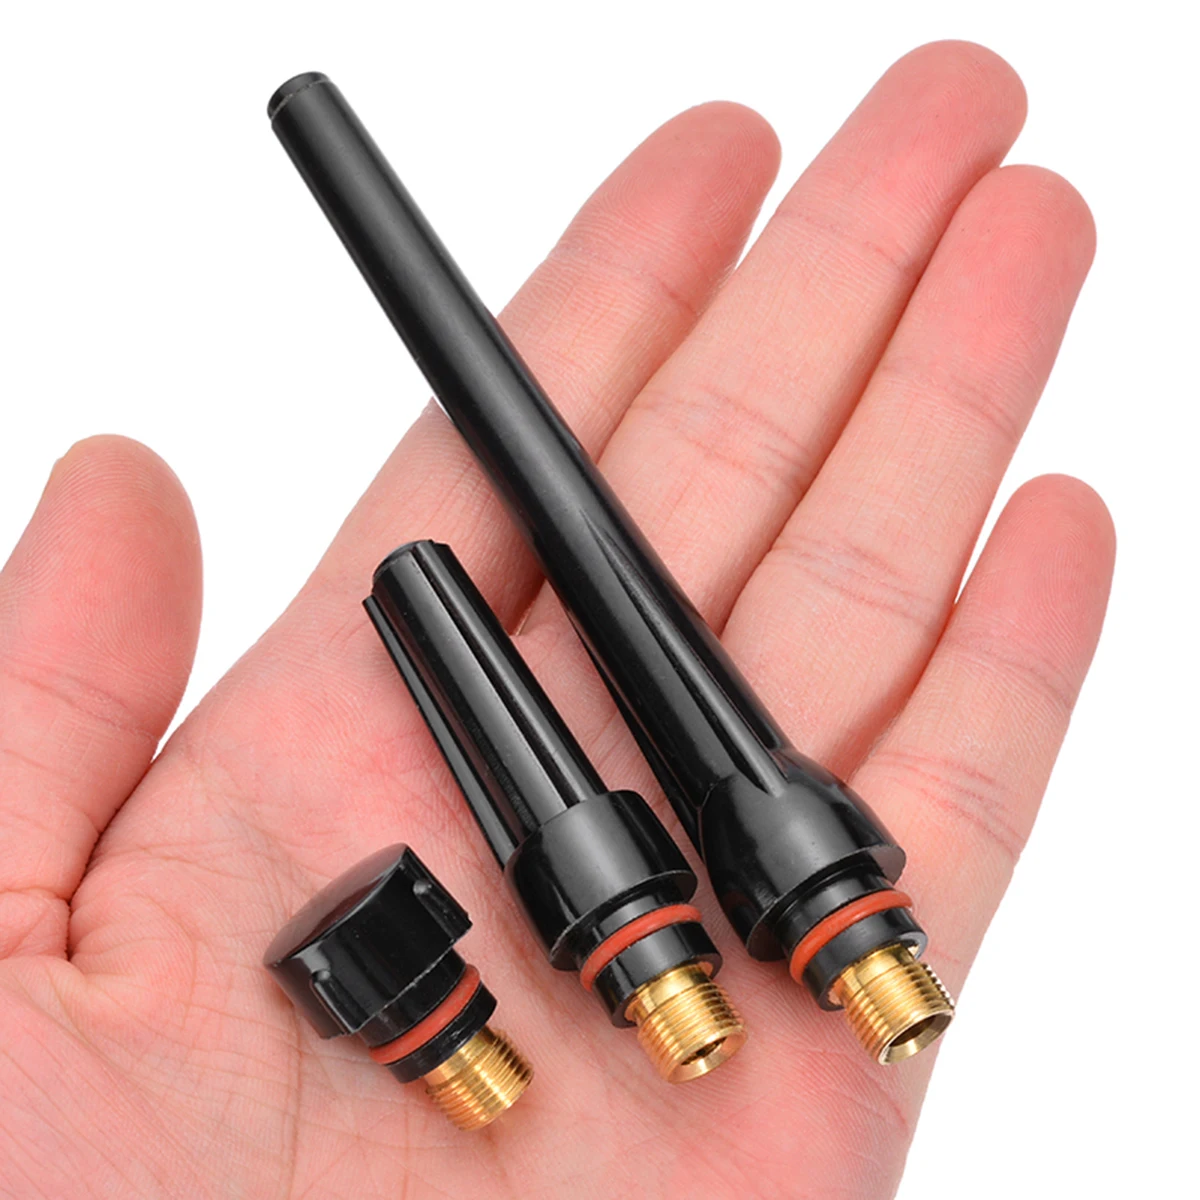 3pcs/Set Tig Welding Torch Long Back Cap 57Y02 57Y03 57Y04 For WP-17/18/26 Series Professional Welding Torch Replacement Parts